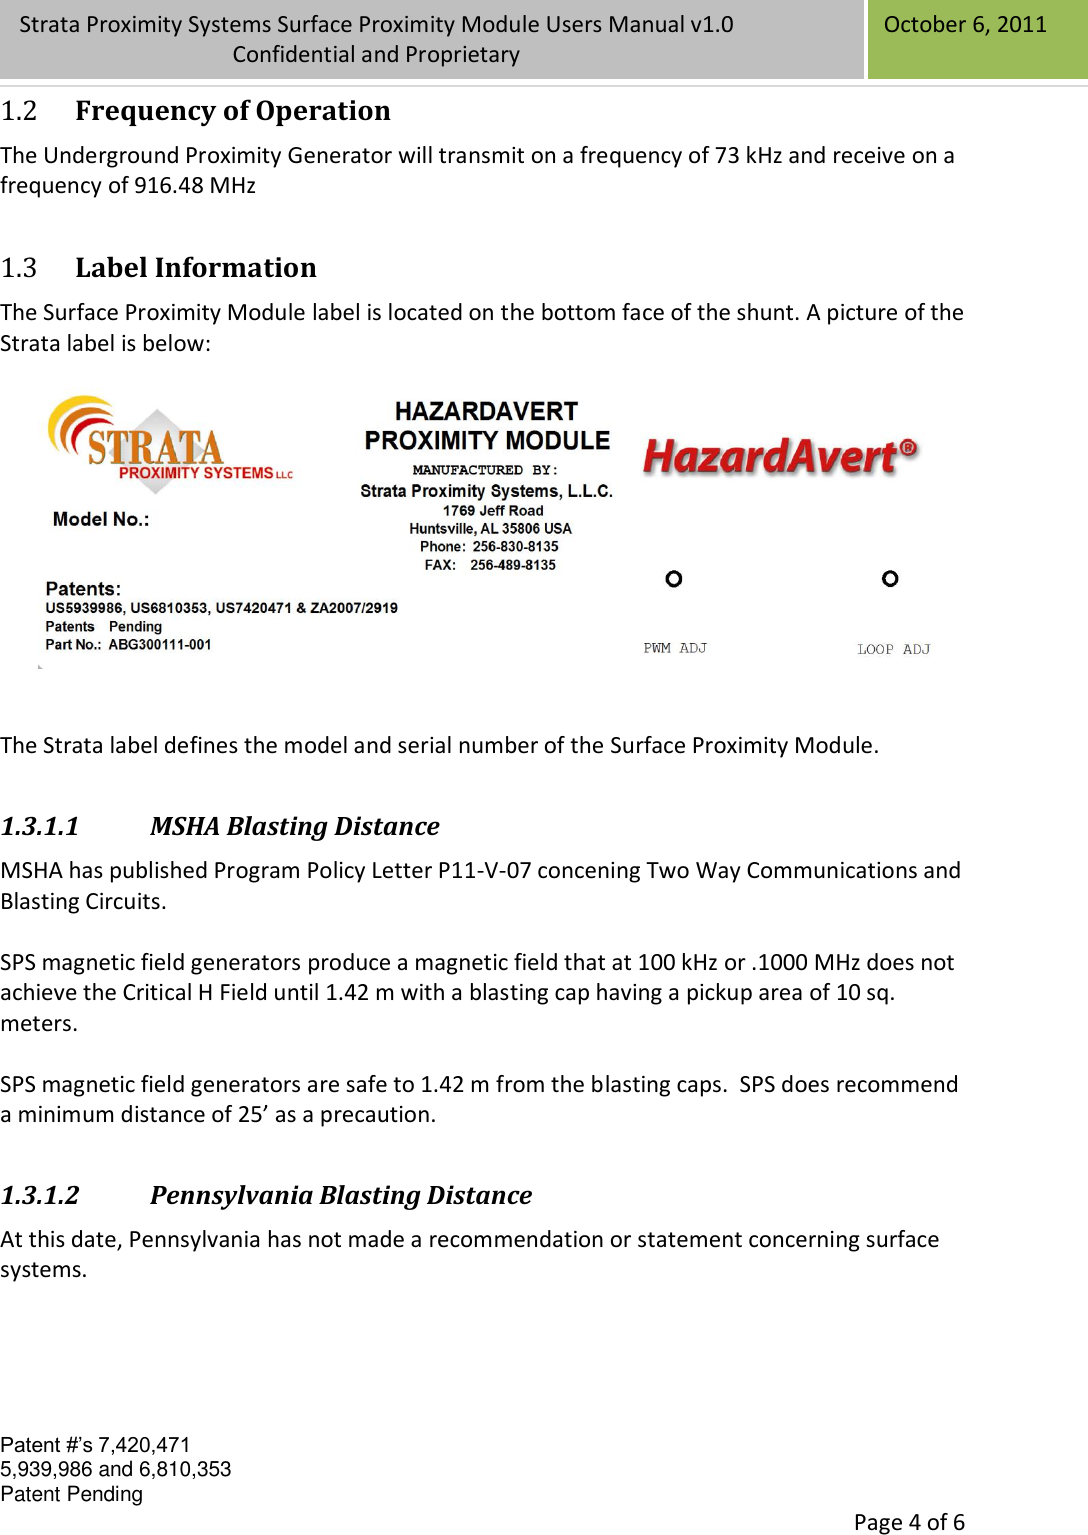 Confidential Patent #’s 7,420,471 5,939,986 and 6,810,353 Patent Pending   Page 4 of 6 Strata Proximity Systems Surface Proximity Module Users Manual v1.0 Confidential and Proprietary   October 6, 2011 1.2 Frequency of Operation The Underground Proximity Generator will transmit on a frequency of 73 kHz and receive on a frequency of 916.48 MHz 1.3 Label Information The Surface Proximity Module label is located on the bottom face of the shunt. A picture of the Strata label is below:     The Strata label defines the model and serial number of the Surface Proximity Module. 1.3.1.1 MSHA Blasting Distance MSHA has published Program Policy Letter P11-V-07 concening Two Way Communications and Blasting Circuits.  SPS magnetic field generators produce a magnetic field that at 100 kHz or .1000 MHz does not achieve the Critical H Field until 1.42 m with a blasting cap having a pickup area of 10 sq. meters.    SPS magnetic field generators are safe to 1.42 m from the blasting caps.  SPS does recommend a minimum distance of 25’ as a precaution. 1.3.1.2 Pennsylvania Blasting Distance At this date, Pennsylvania has not made a recommendation or statement concerning surface systems.      